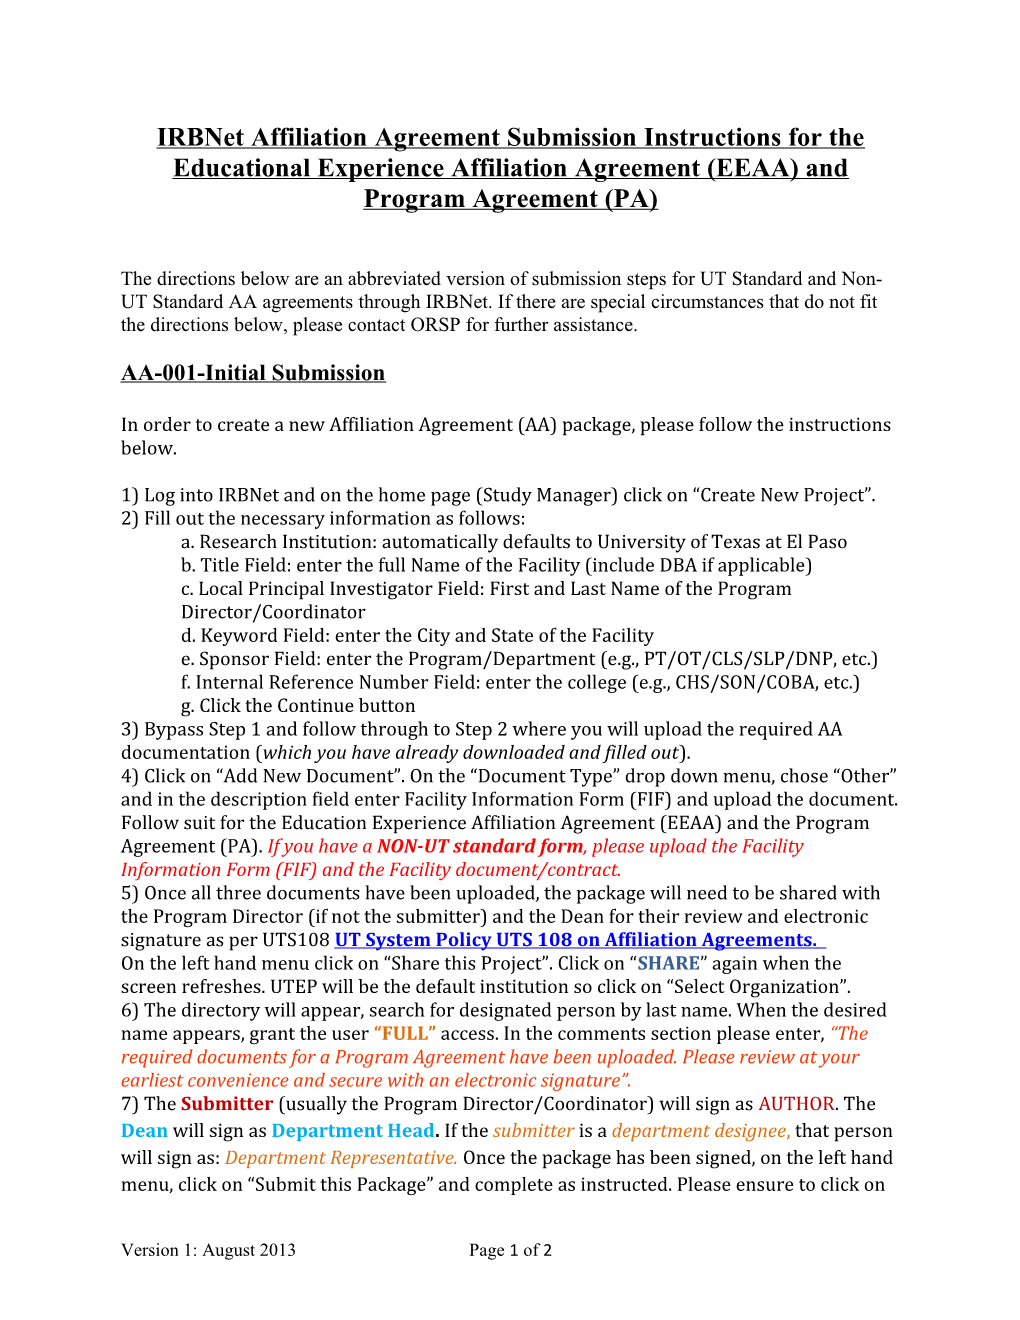 Irbnet Affiliation Agreement Submission Instructions for the Educational Experience Affiliation